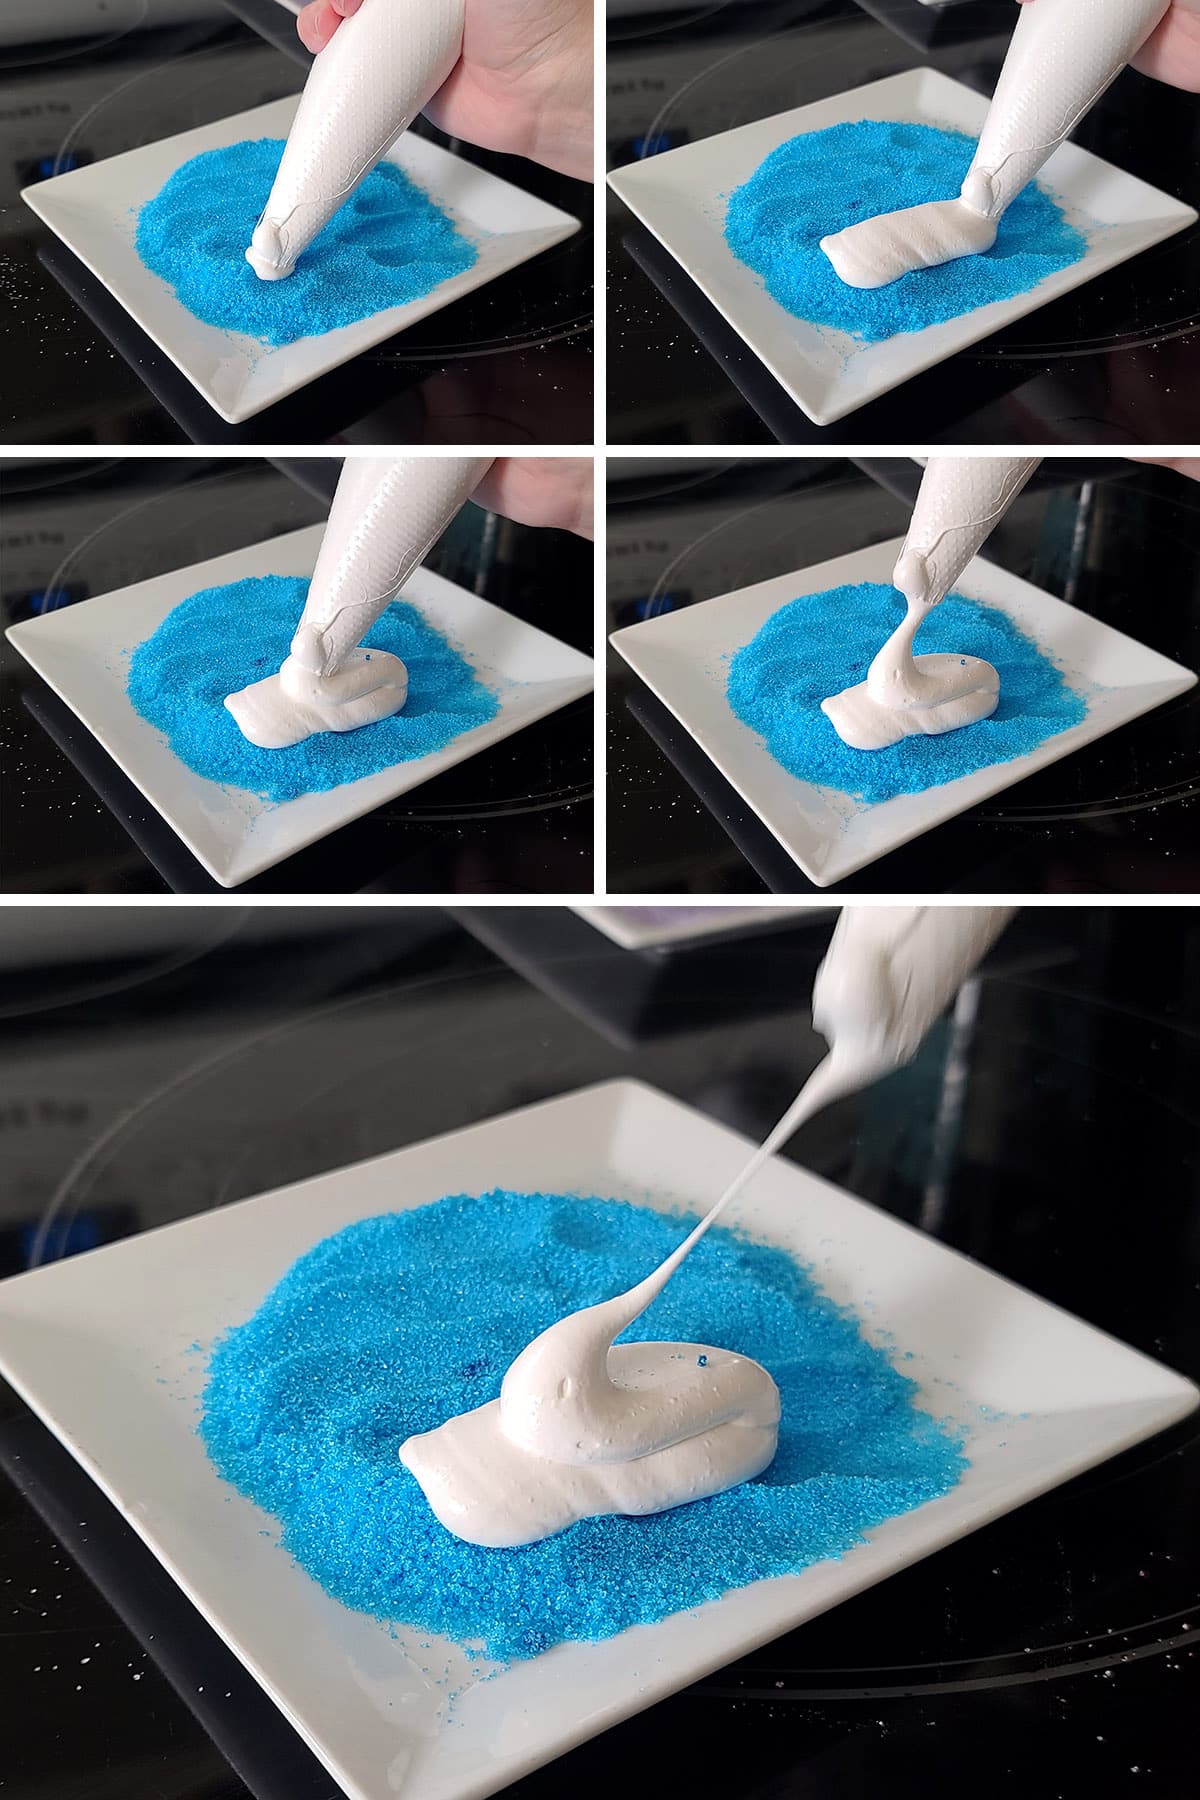 A 5 part image showing the marshmallow being piped onto a plate of blue sugar.